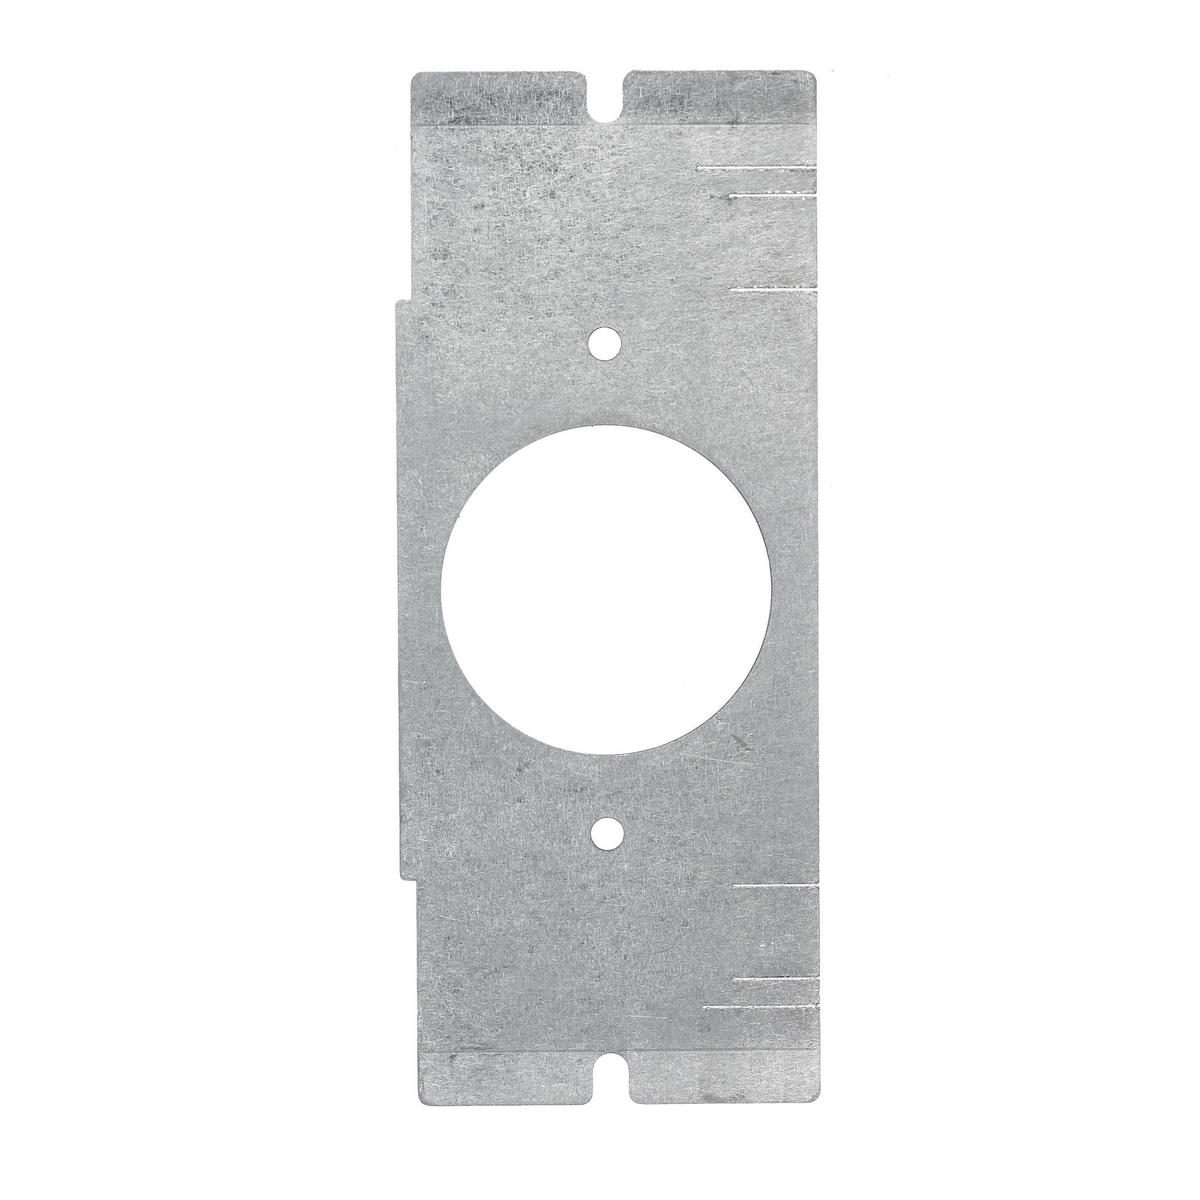 Hubbell FBMP156 Concrete, Access, Wood Floorboxes, Recessed, 2, 4, & 6-Gang Series, Mounting Plate, 1-Gang, (1) Twist-Lock® 1.60" Diameter Opening  ; Plate for Use in SystemOne 2, 4 & 6-Gang Recessed Floorboxes ; 1-Gang- (1) Single Receptacle Opening with 1.60" Diameter 